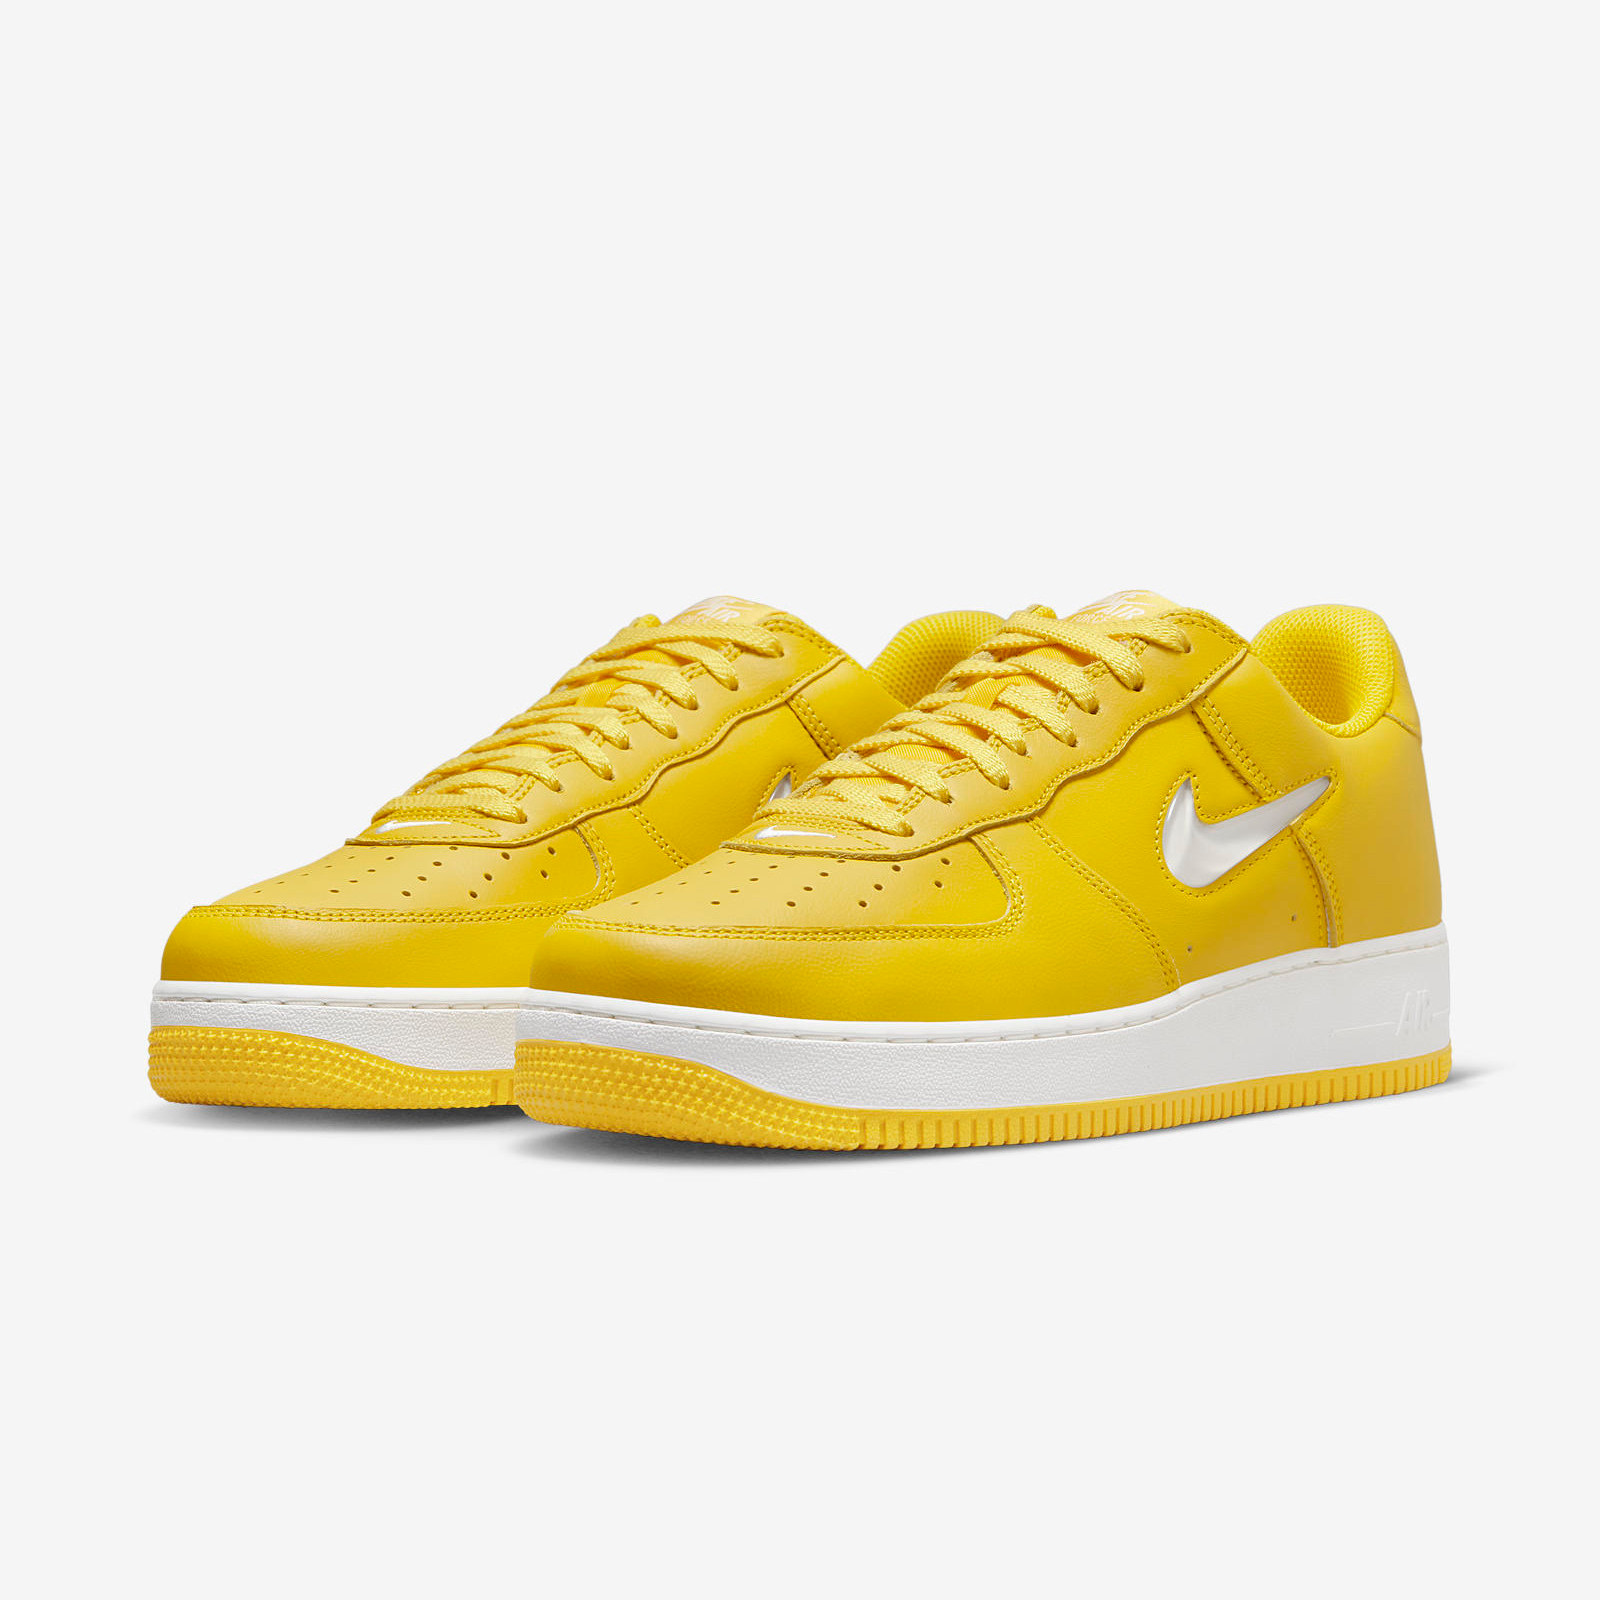 Nike Air Force 1
Color of the Month
« Speed Yellow »